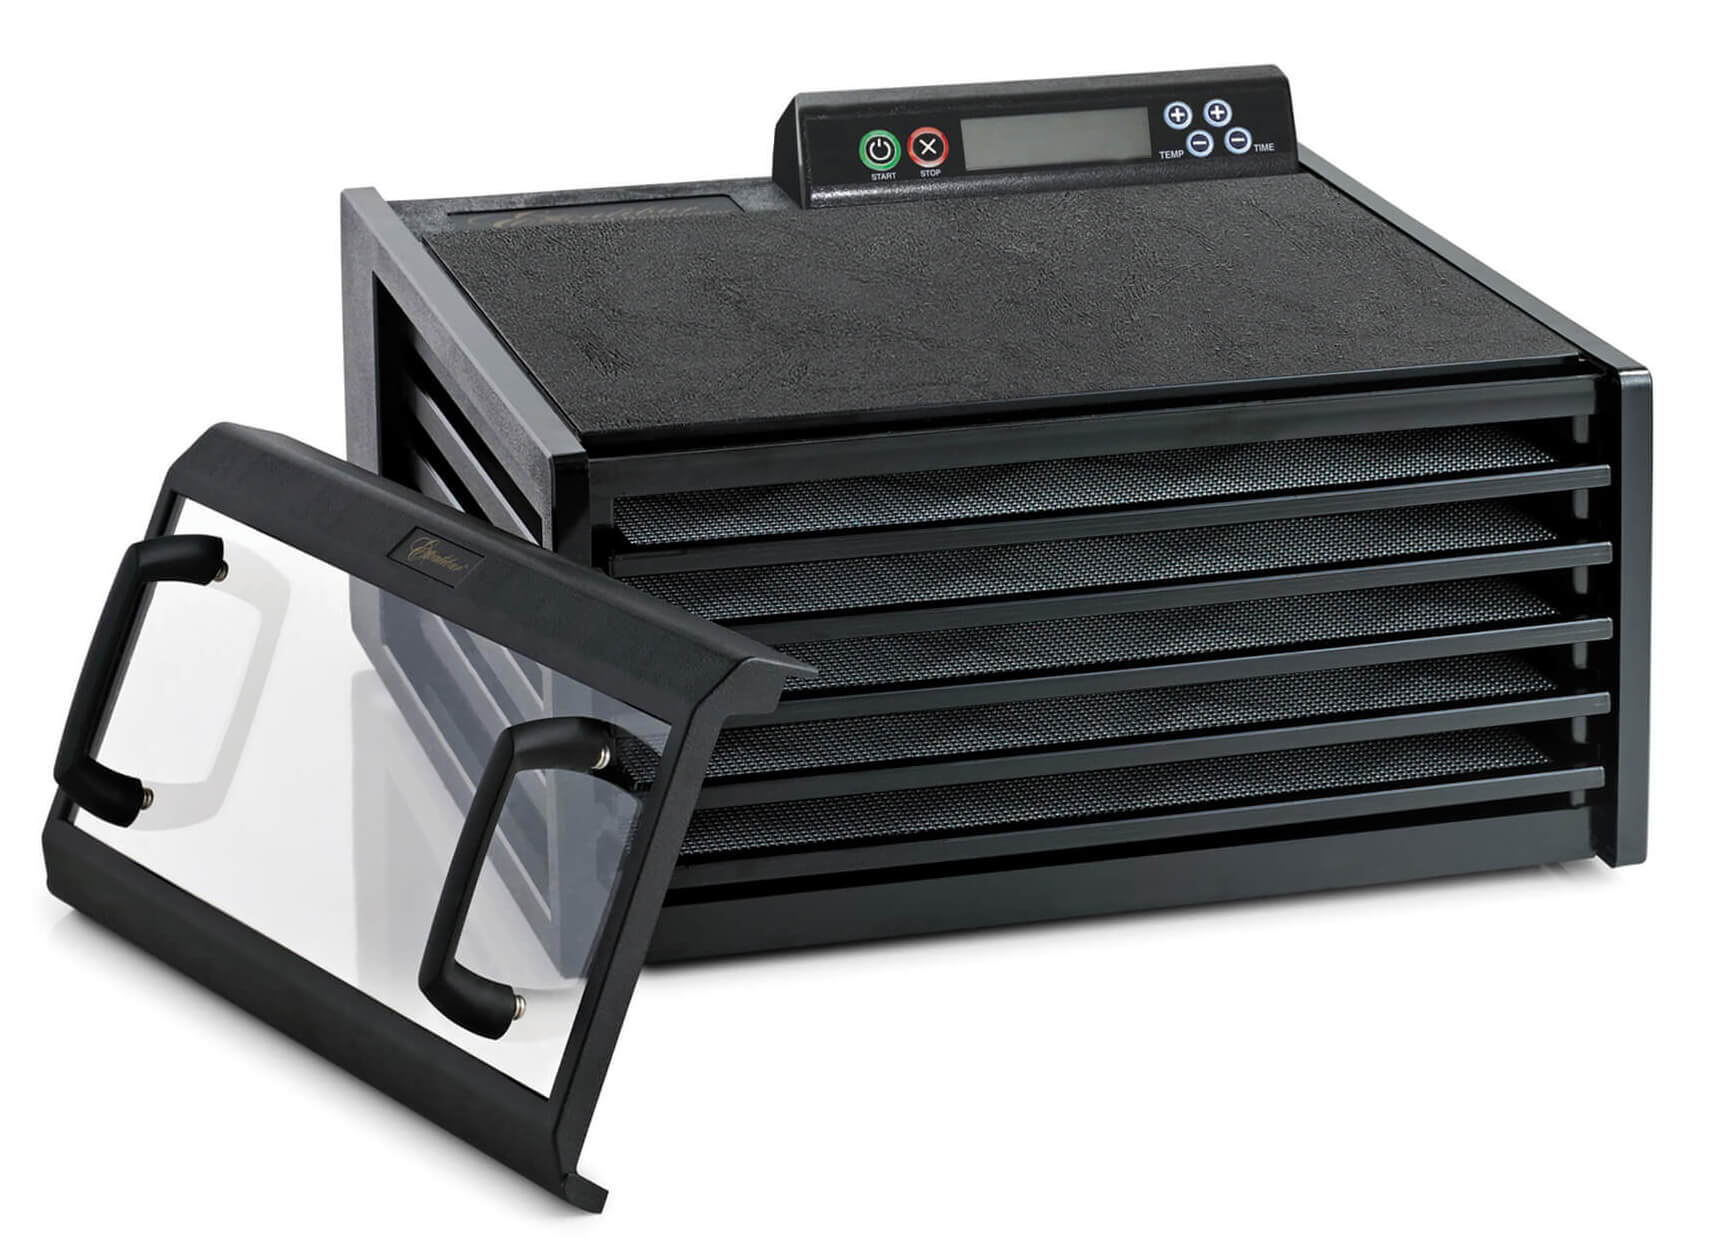 Excalibur 4548CDB 5 tray digital dehydrator with clear door propped to the side.